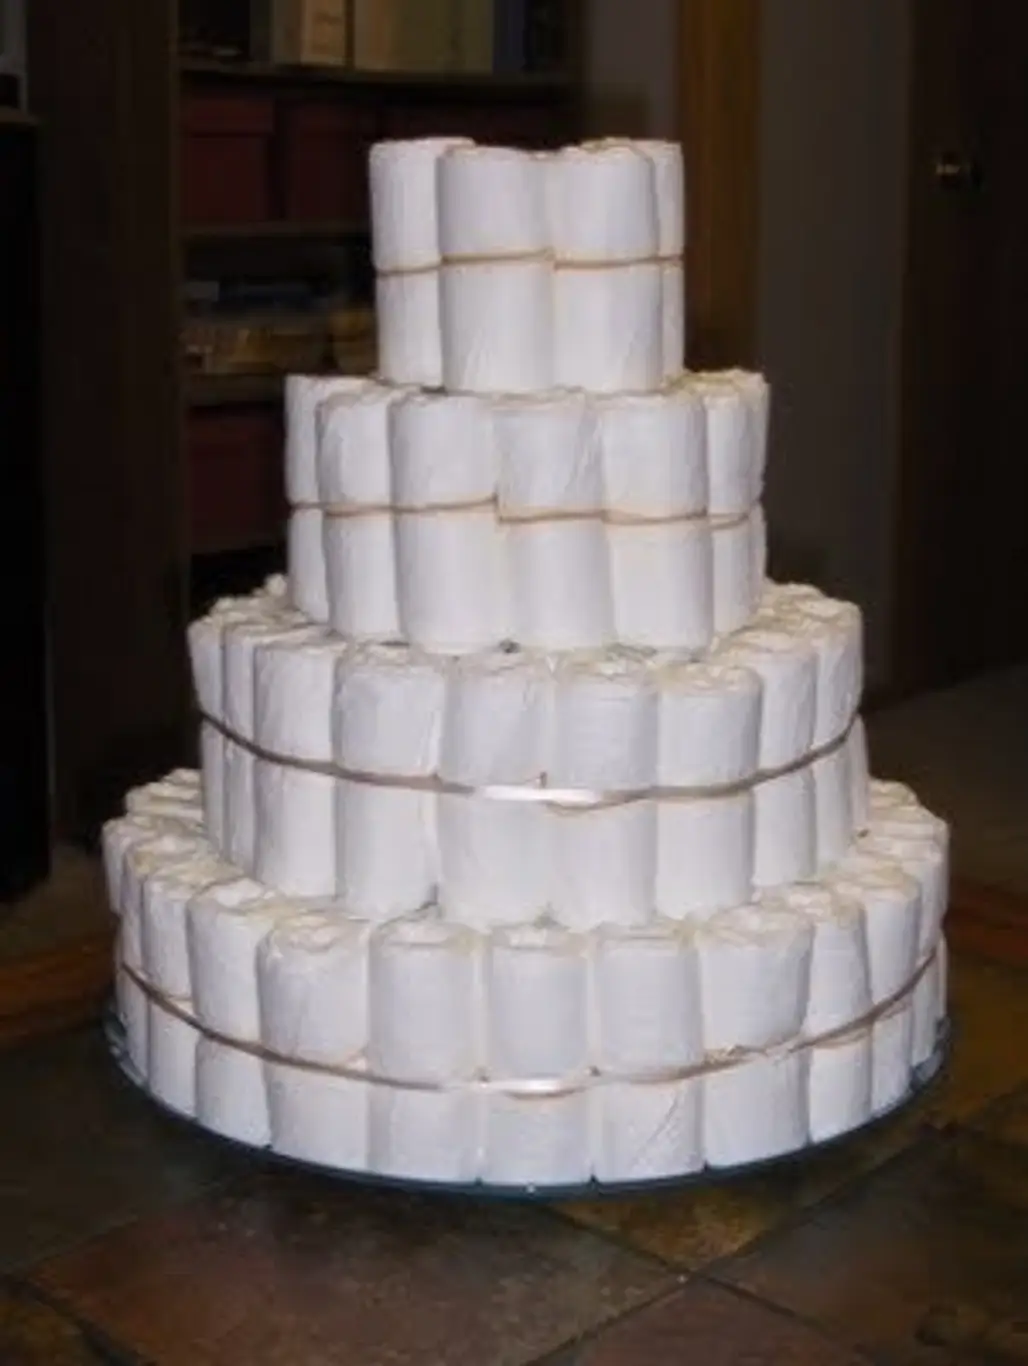 Instructions for Building a Diaper Cake